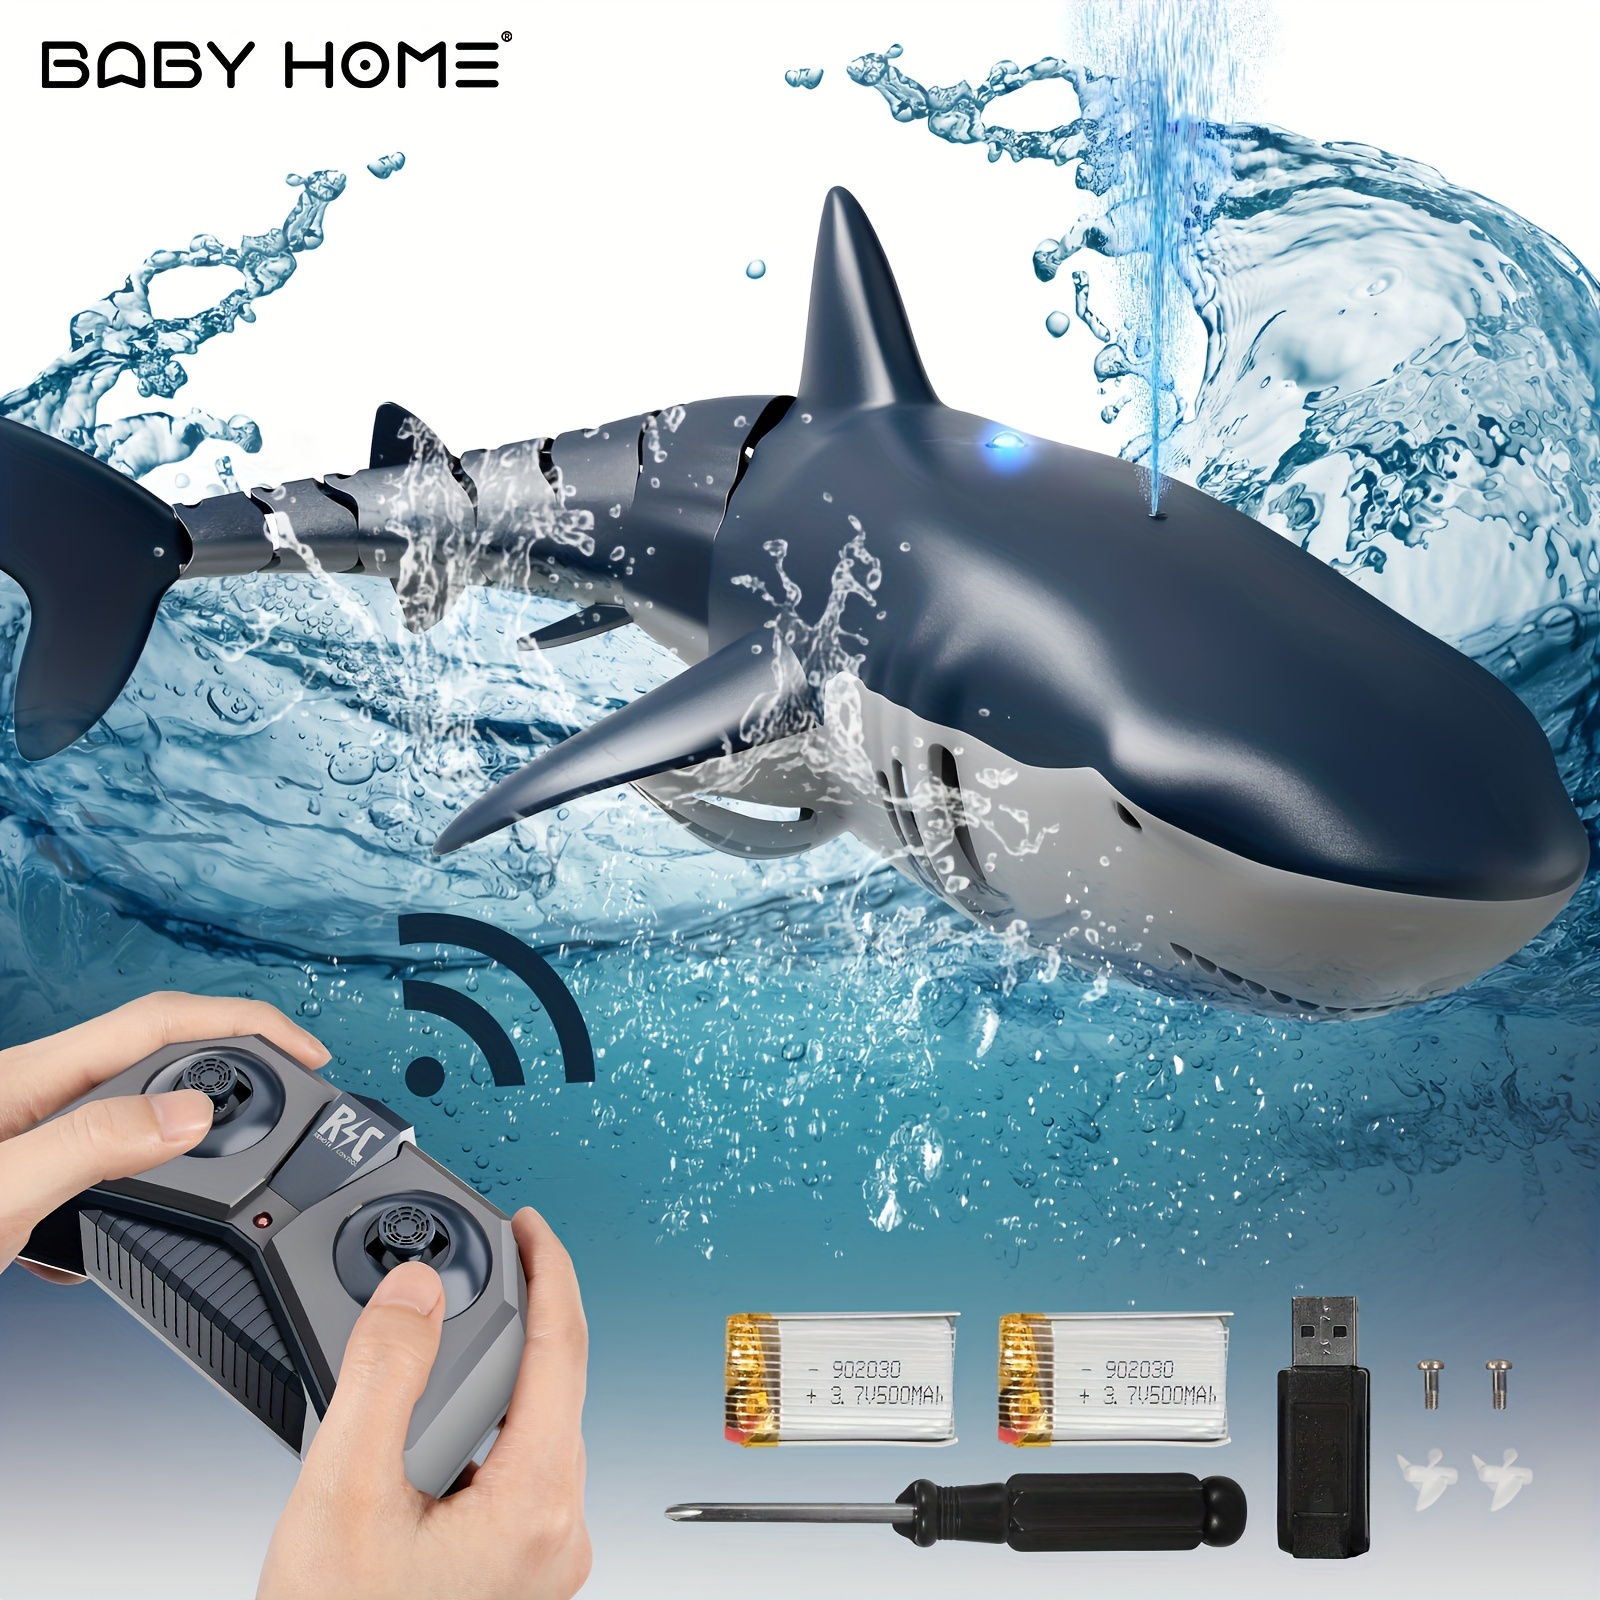 BABYHOME * Remote Control Shark * High Simulation Scale Fish With Light &  Spray Water For Lake Bathroom Pool Toys For Kids Boys Halloween Christmas  Birthday Gift